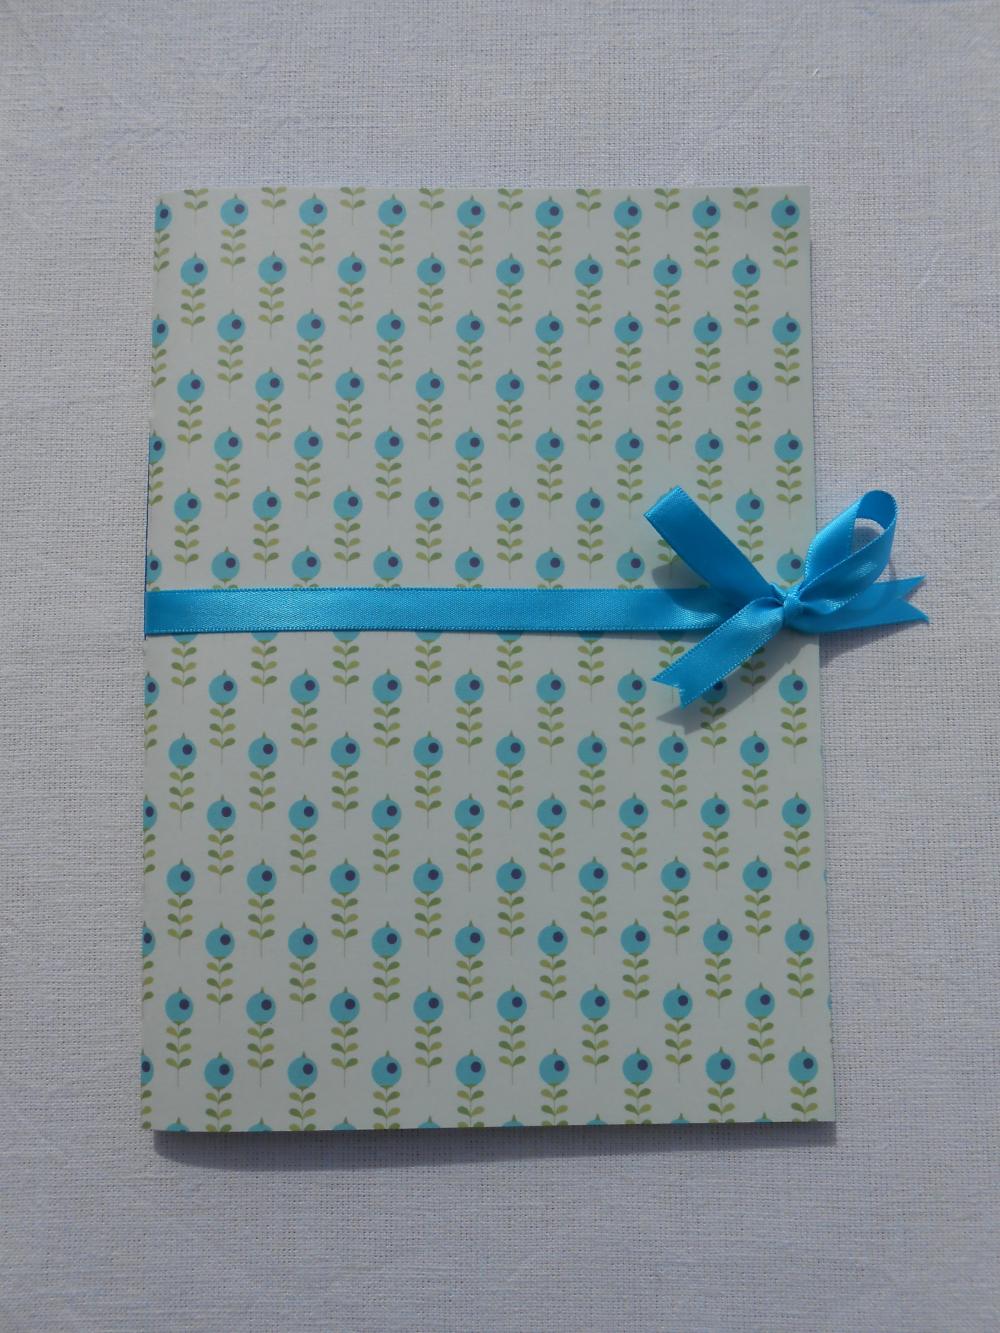 A5 Handstitched Notebook With Tilda Cover And Turquoise Pages And Ribbon